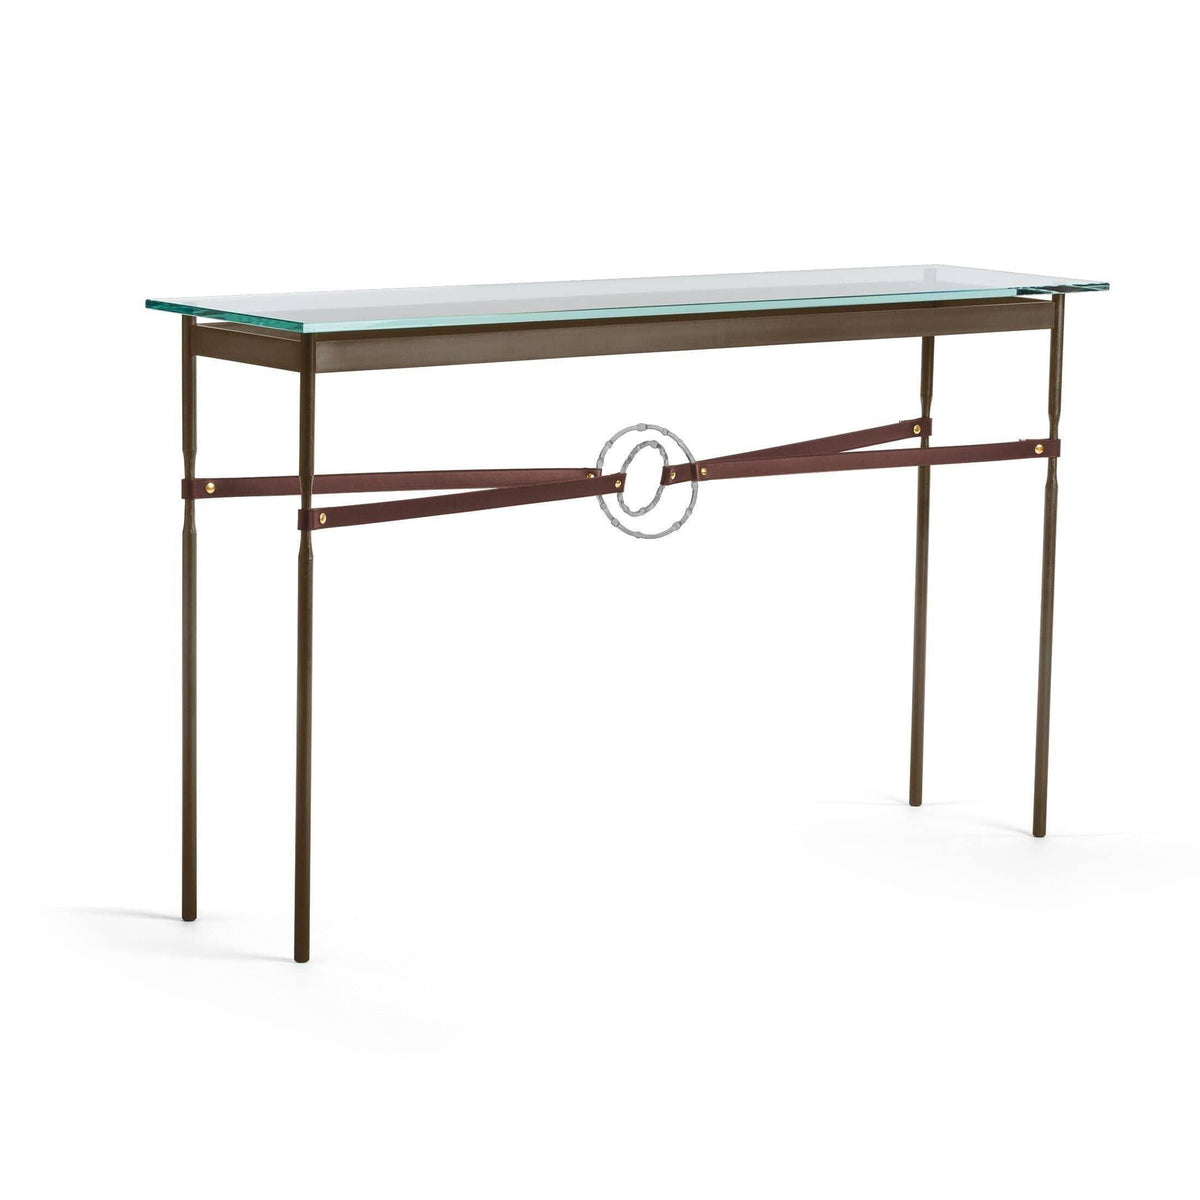 Hubbardton Forge - Equus Brown Leather Console Table - 750118-05-82-LB-VA0714 | Montreal Lighting & Hardware